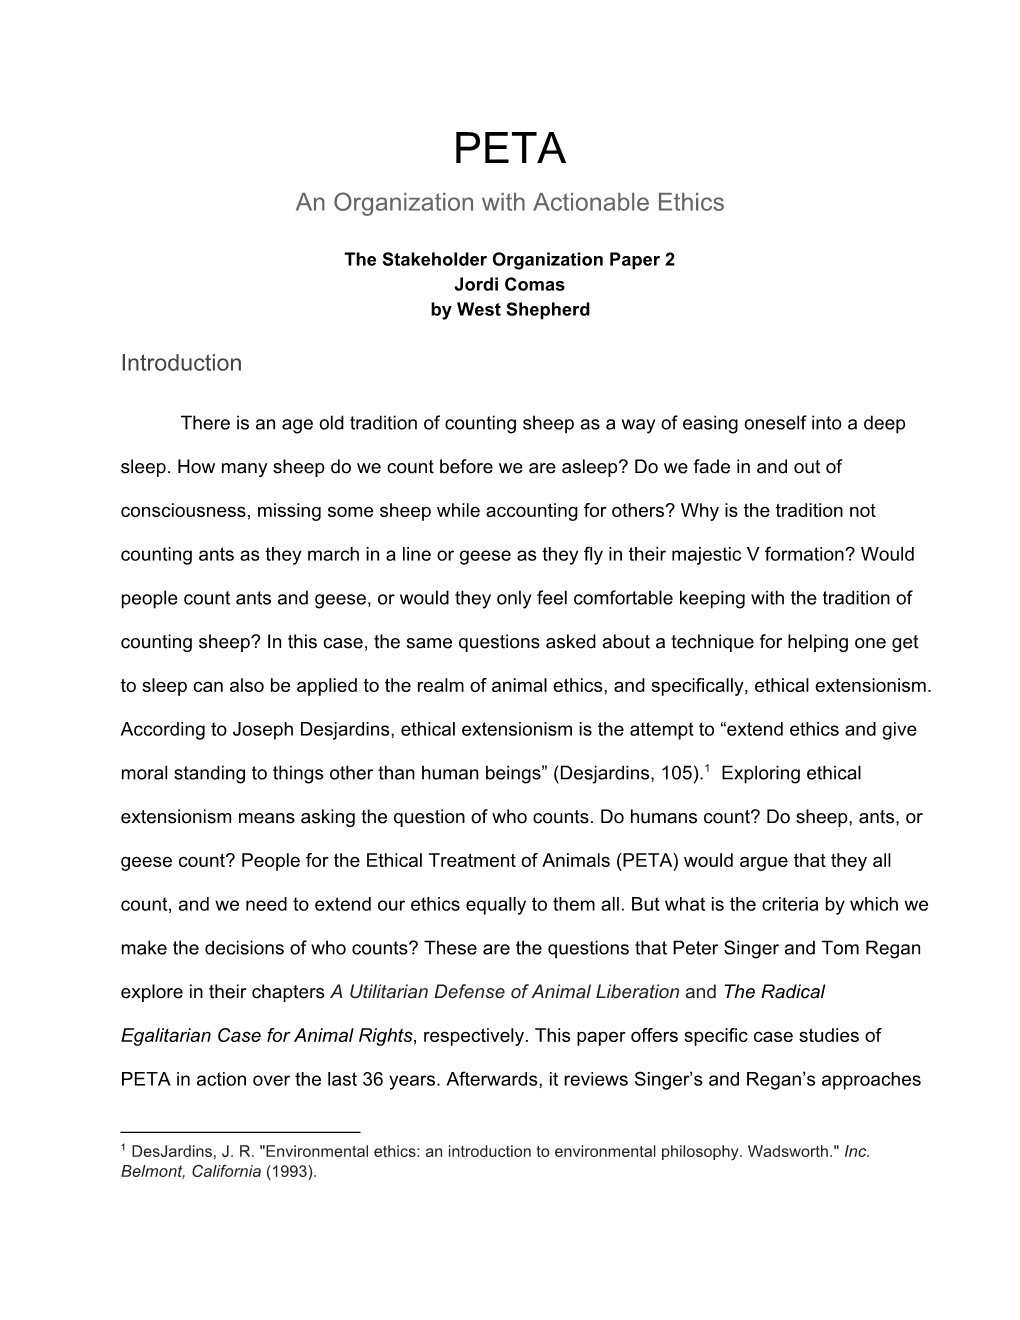 PETA an Organization with Actionable Ethics